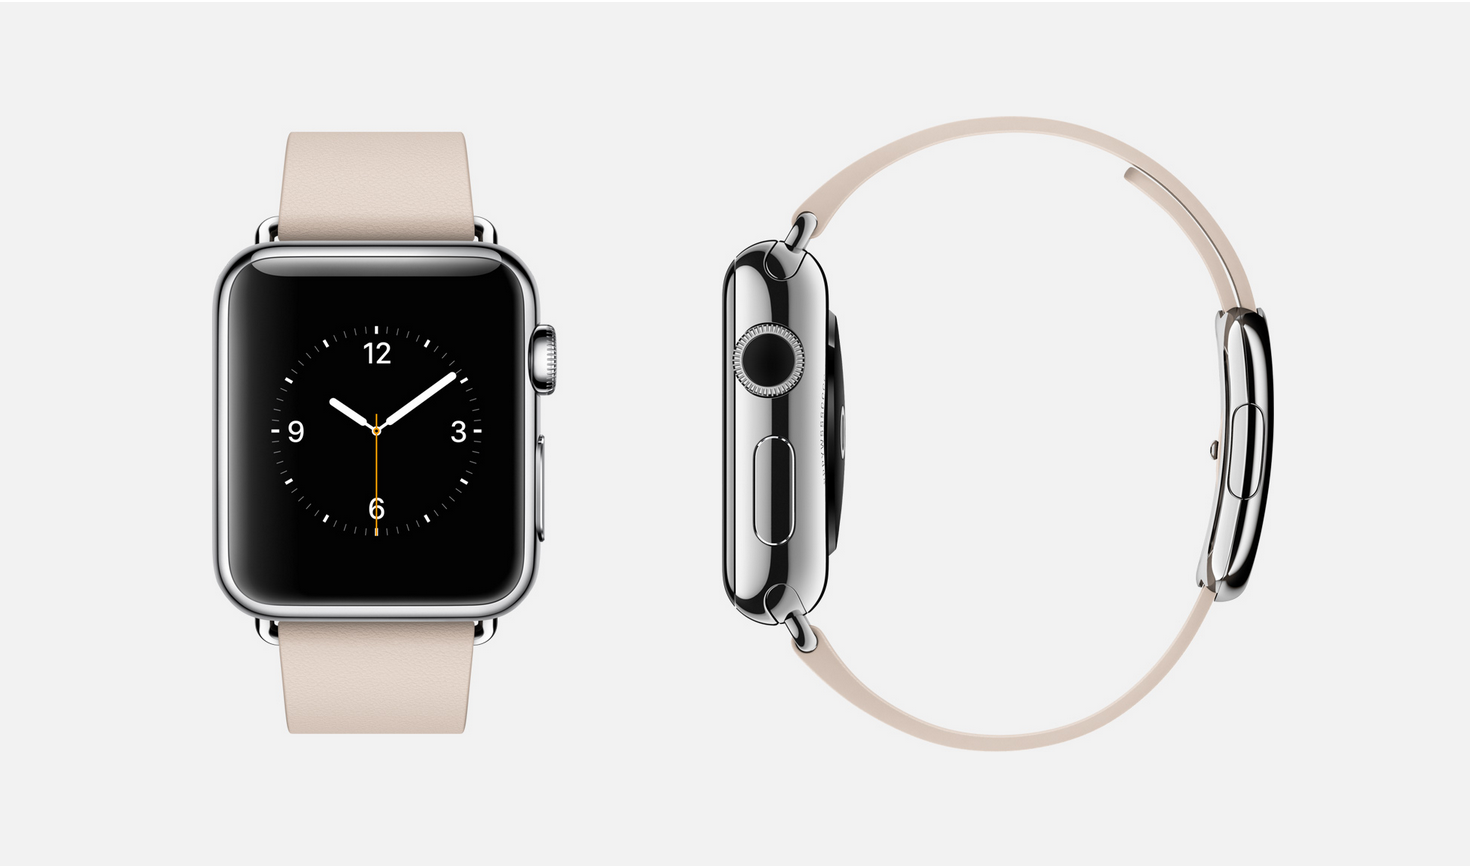 Apple Watch - gorgeous styling compared with the competitors